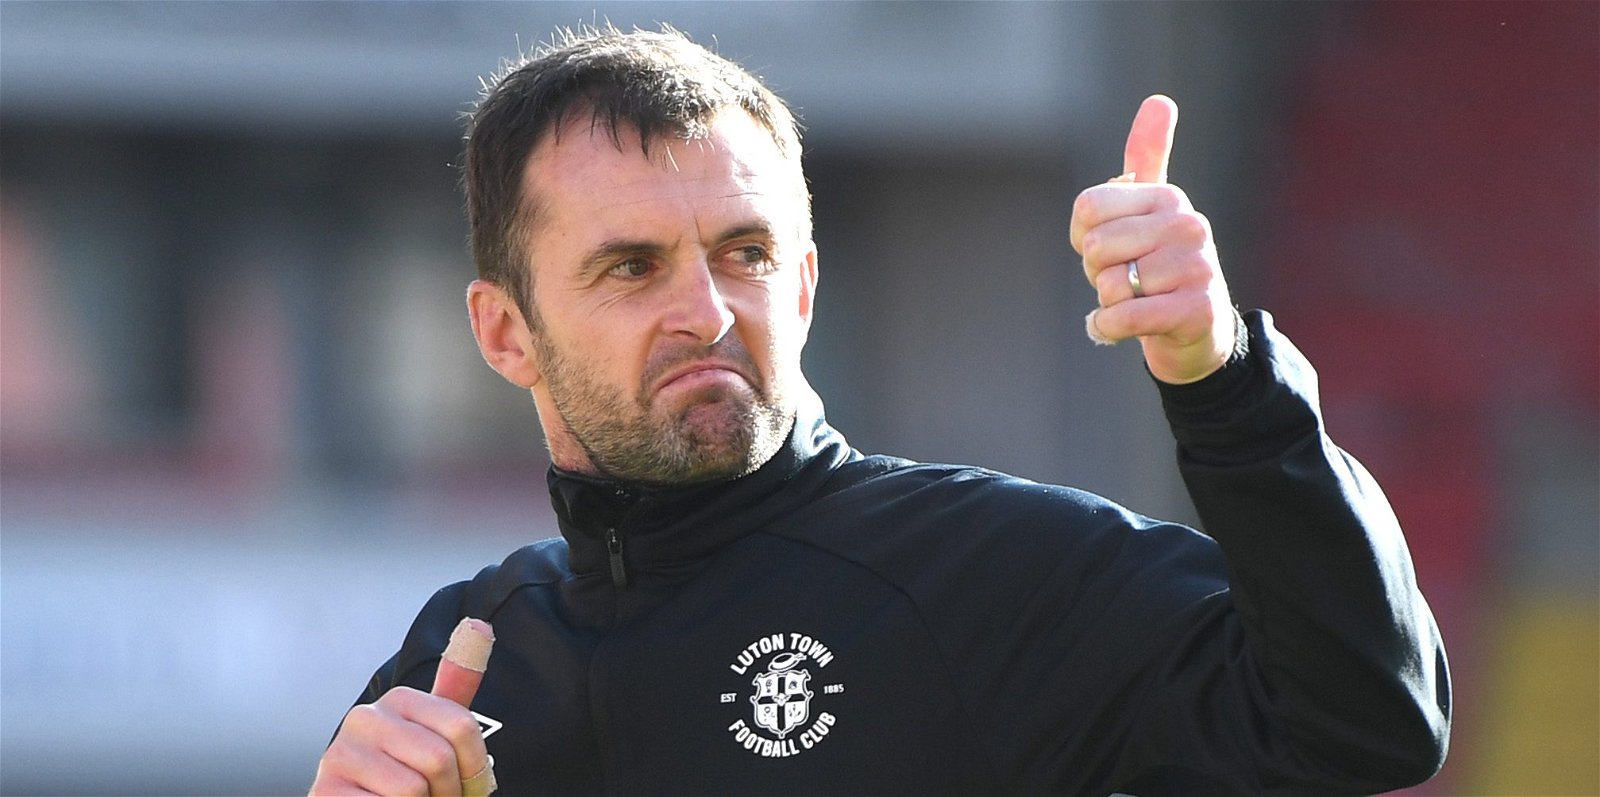 Luton Town, &#8220;Really tough game&#8221; Luton Town boss speaks ahead of Wycombe Wanderers tie